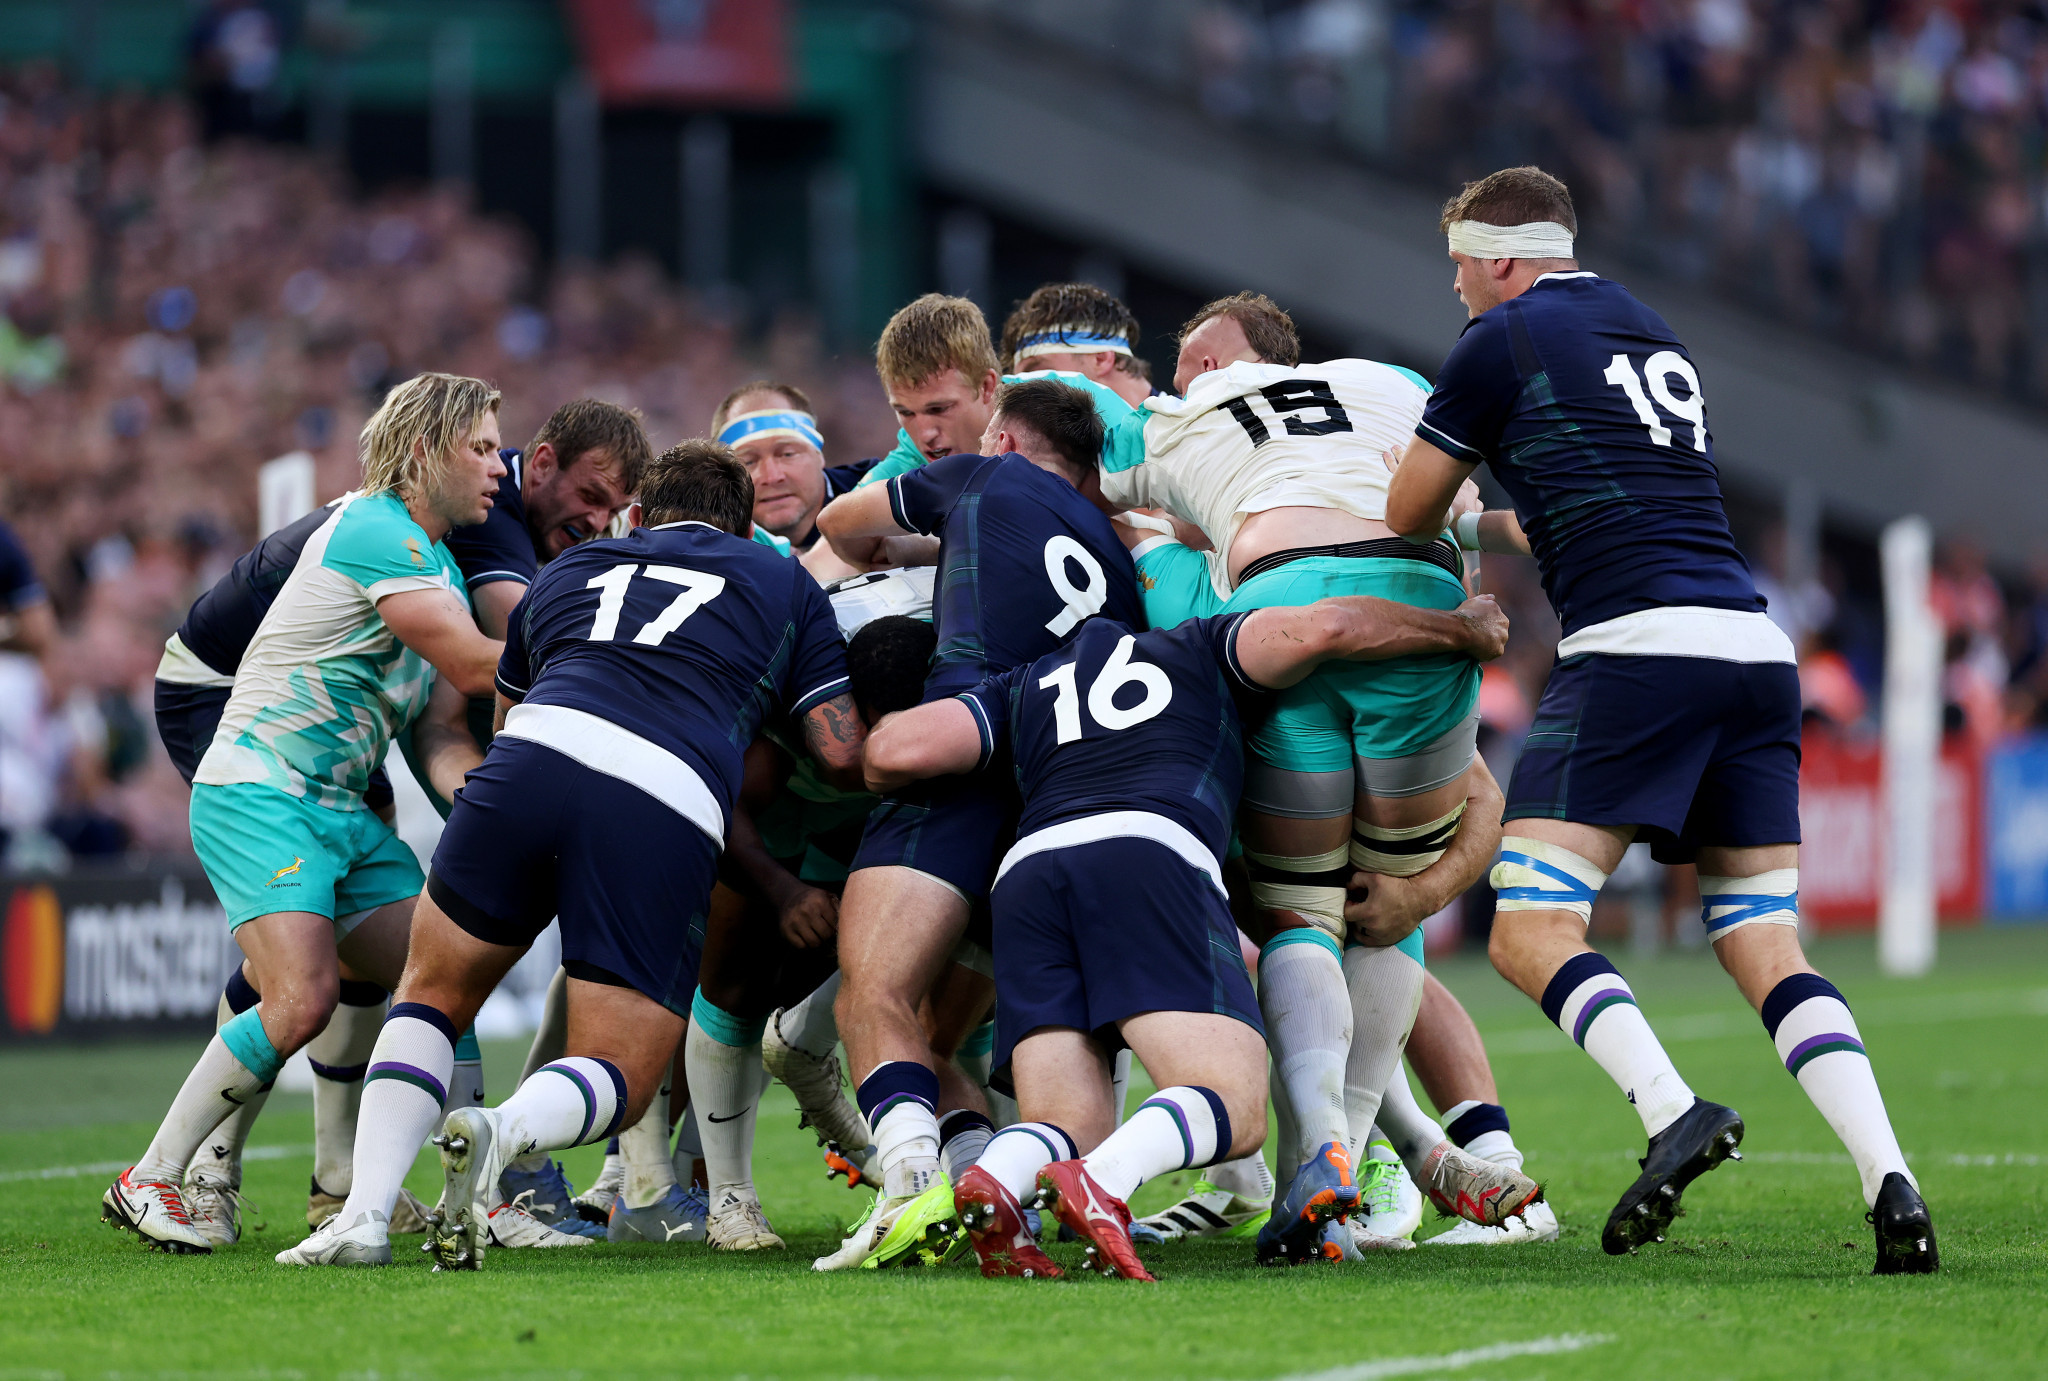 Defending champions South Africa beat Scotland 18-3 in a bruising encounter ©Getty Images